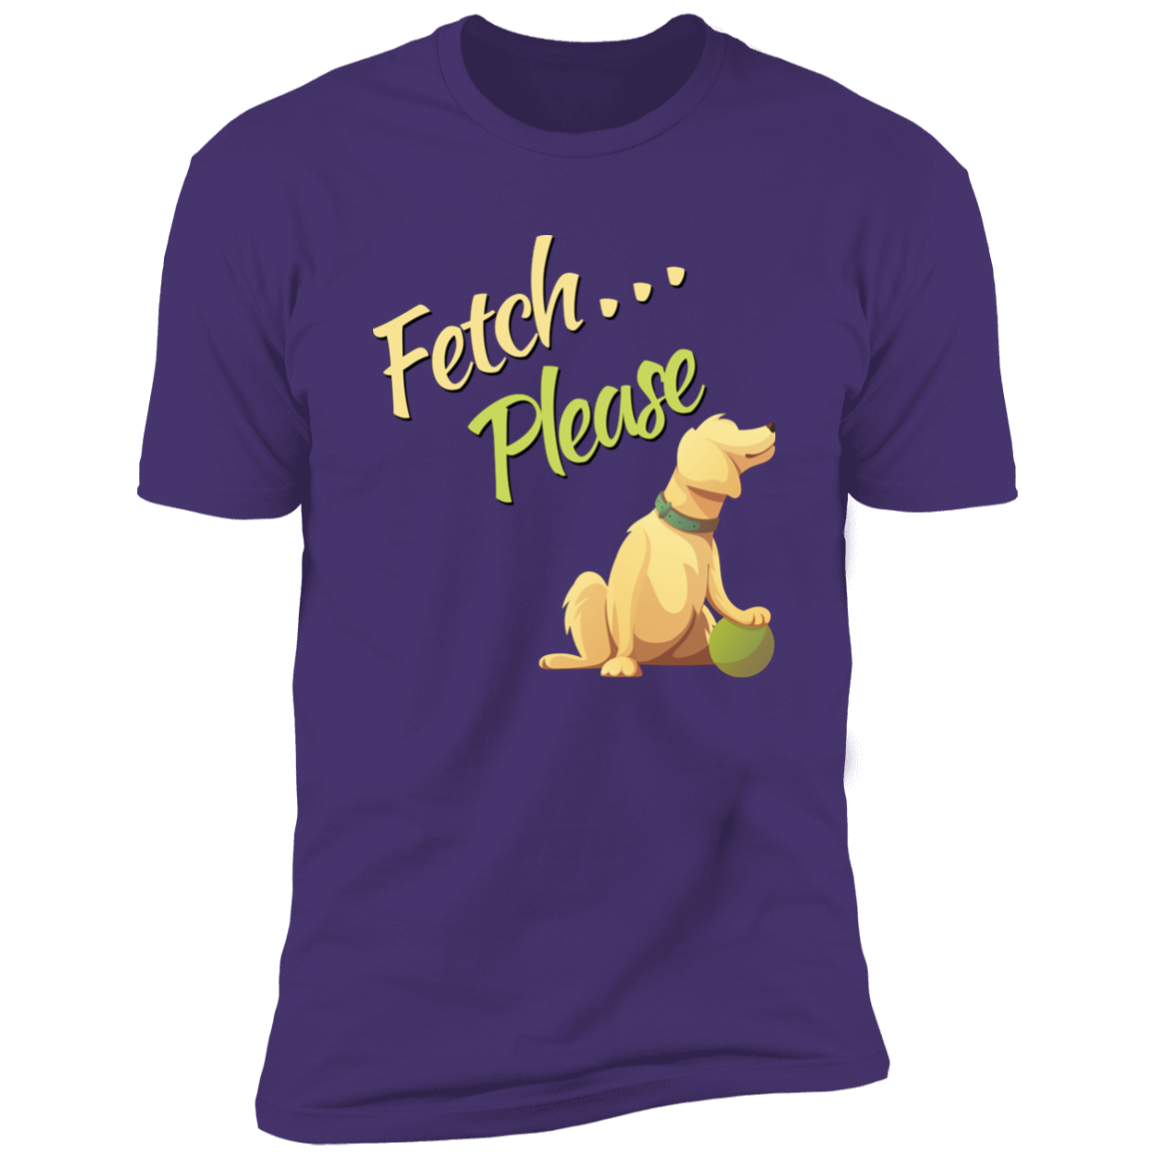 Fetch Please funny dog t-shirt, funny dog shirt for humans, in purple rush